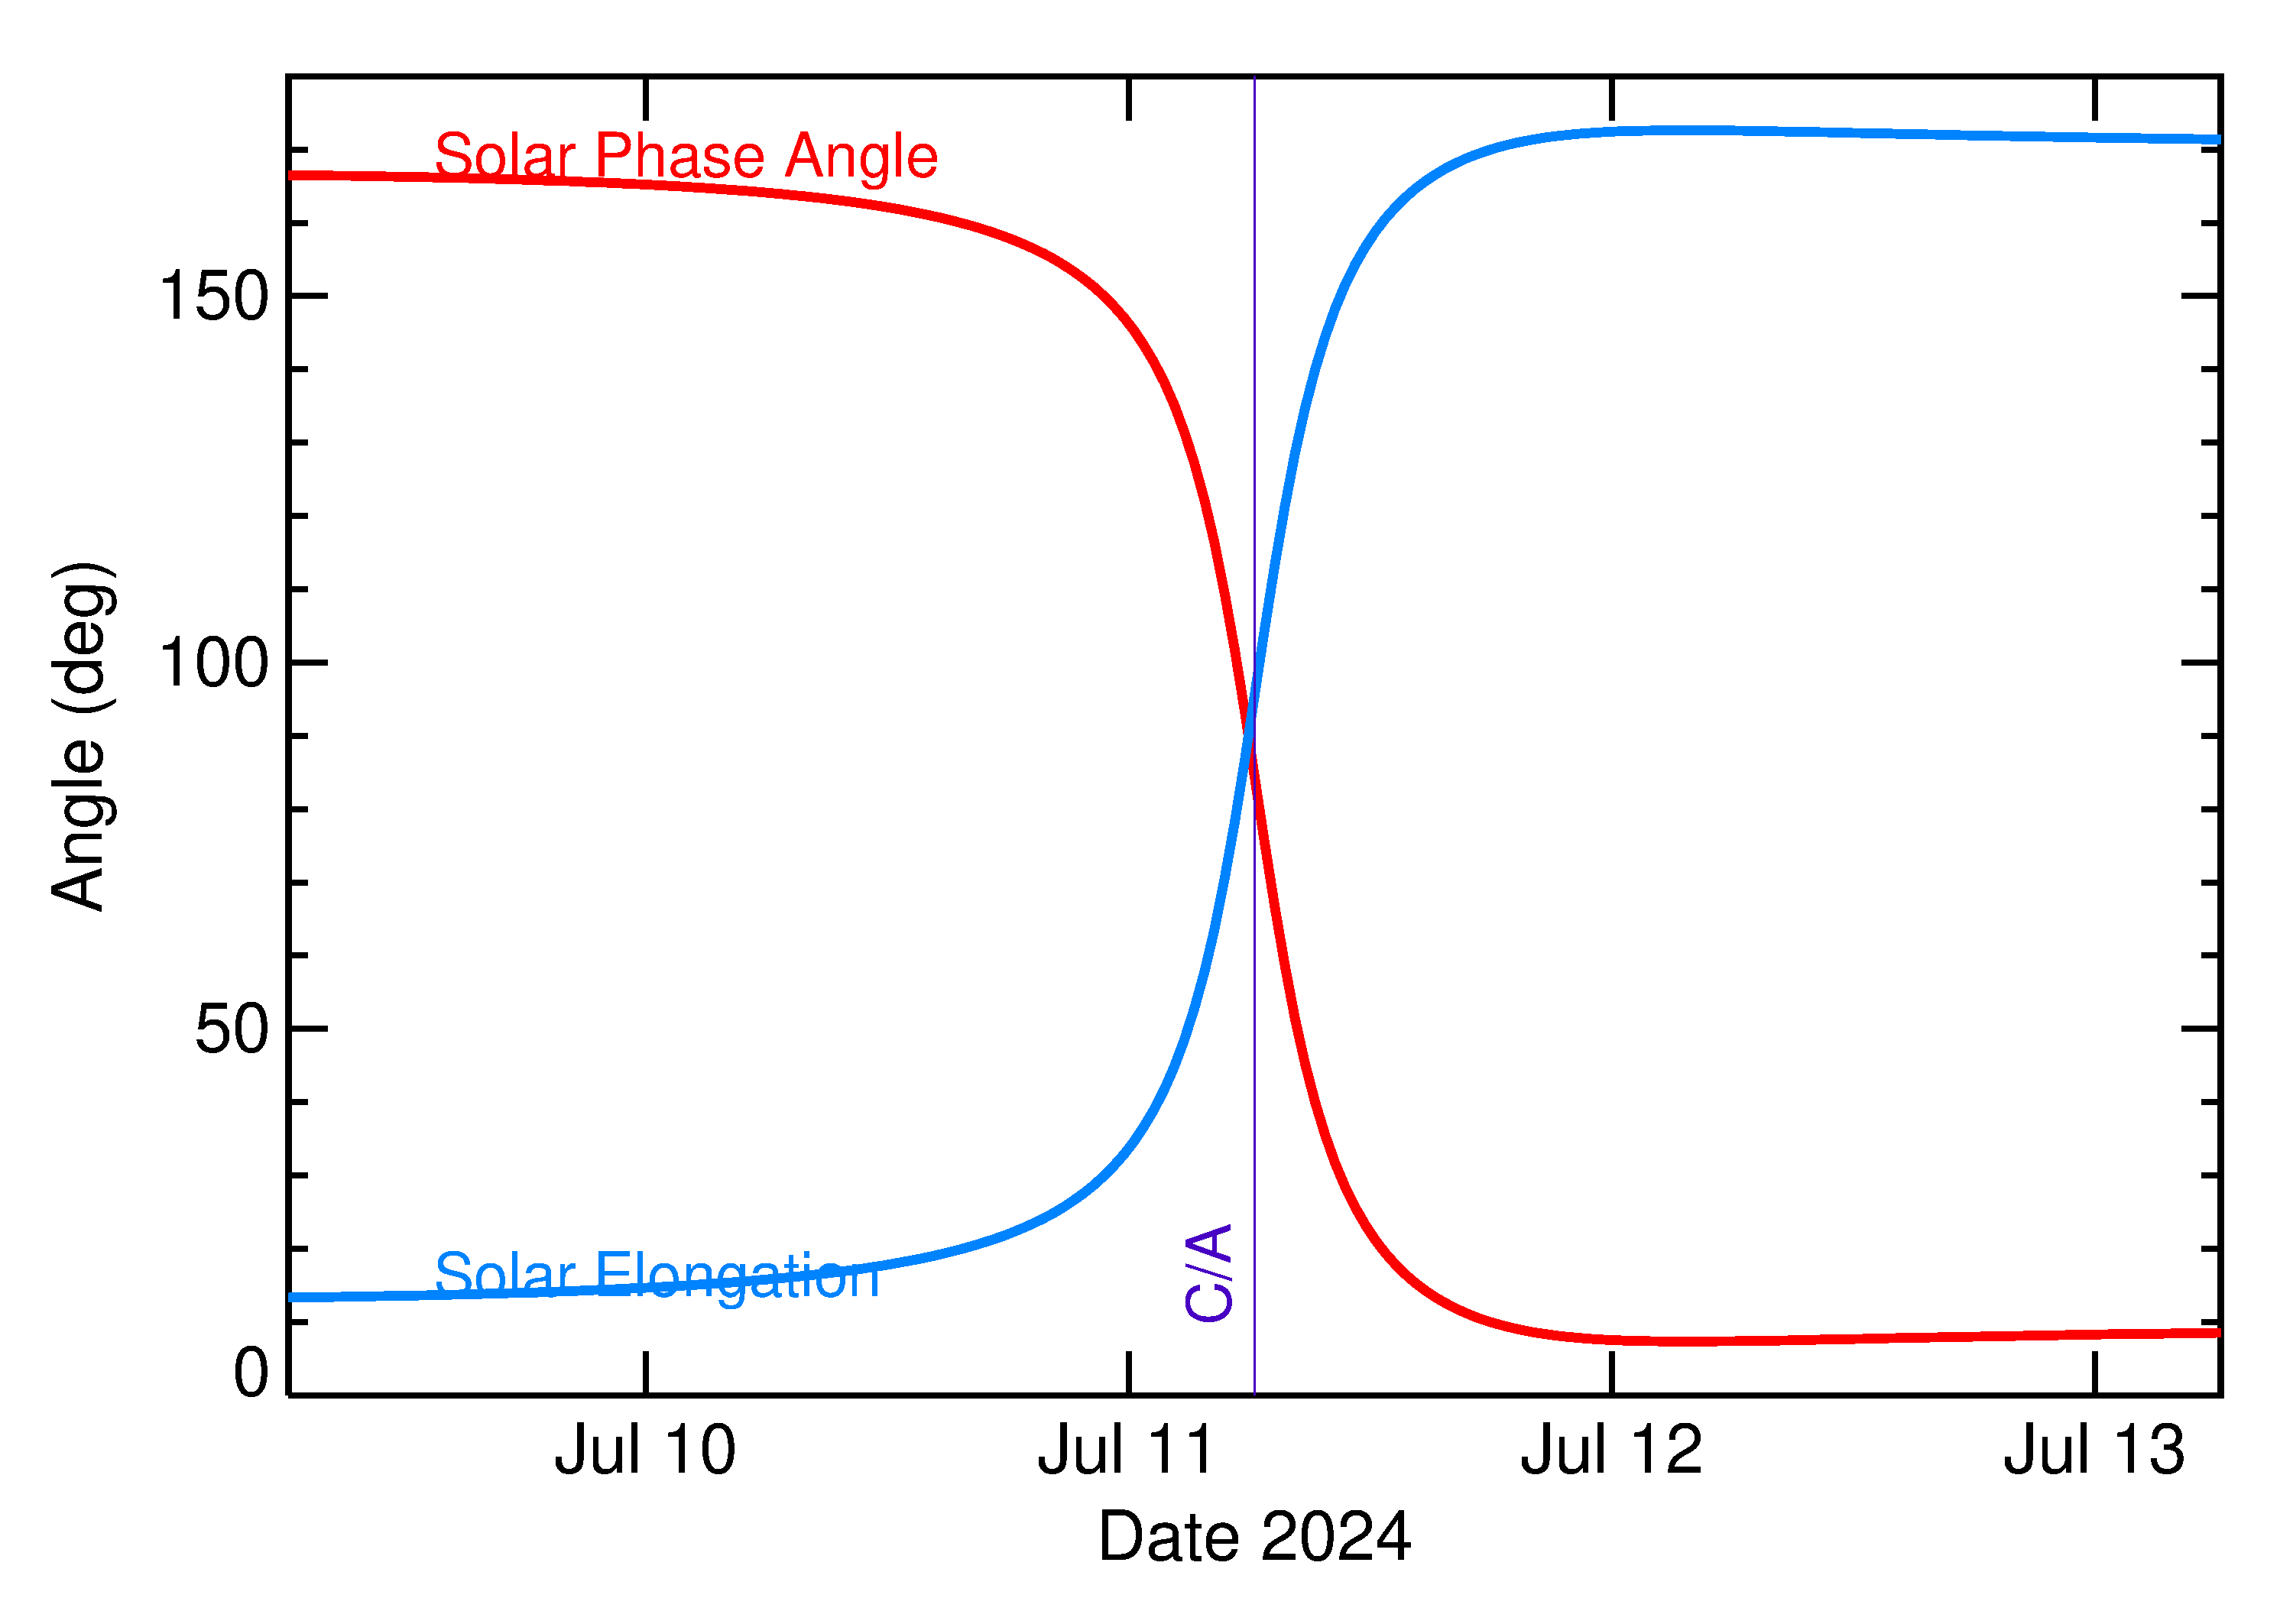 Solar Elongation and Solar Phase Angle of 2024 NK3 in the days around closest approach